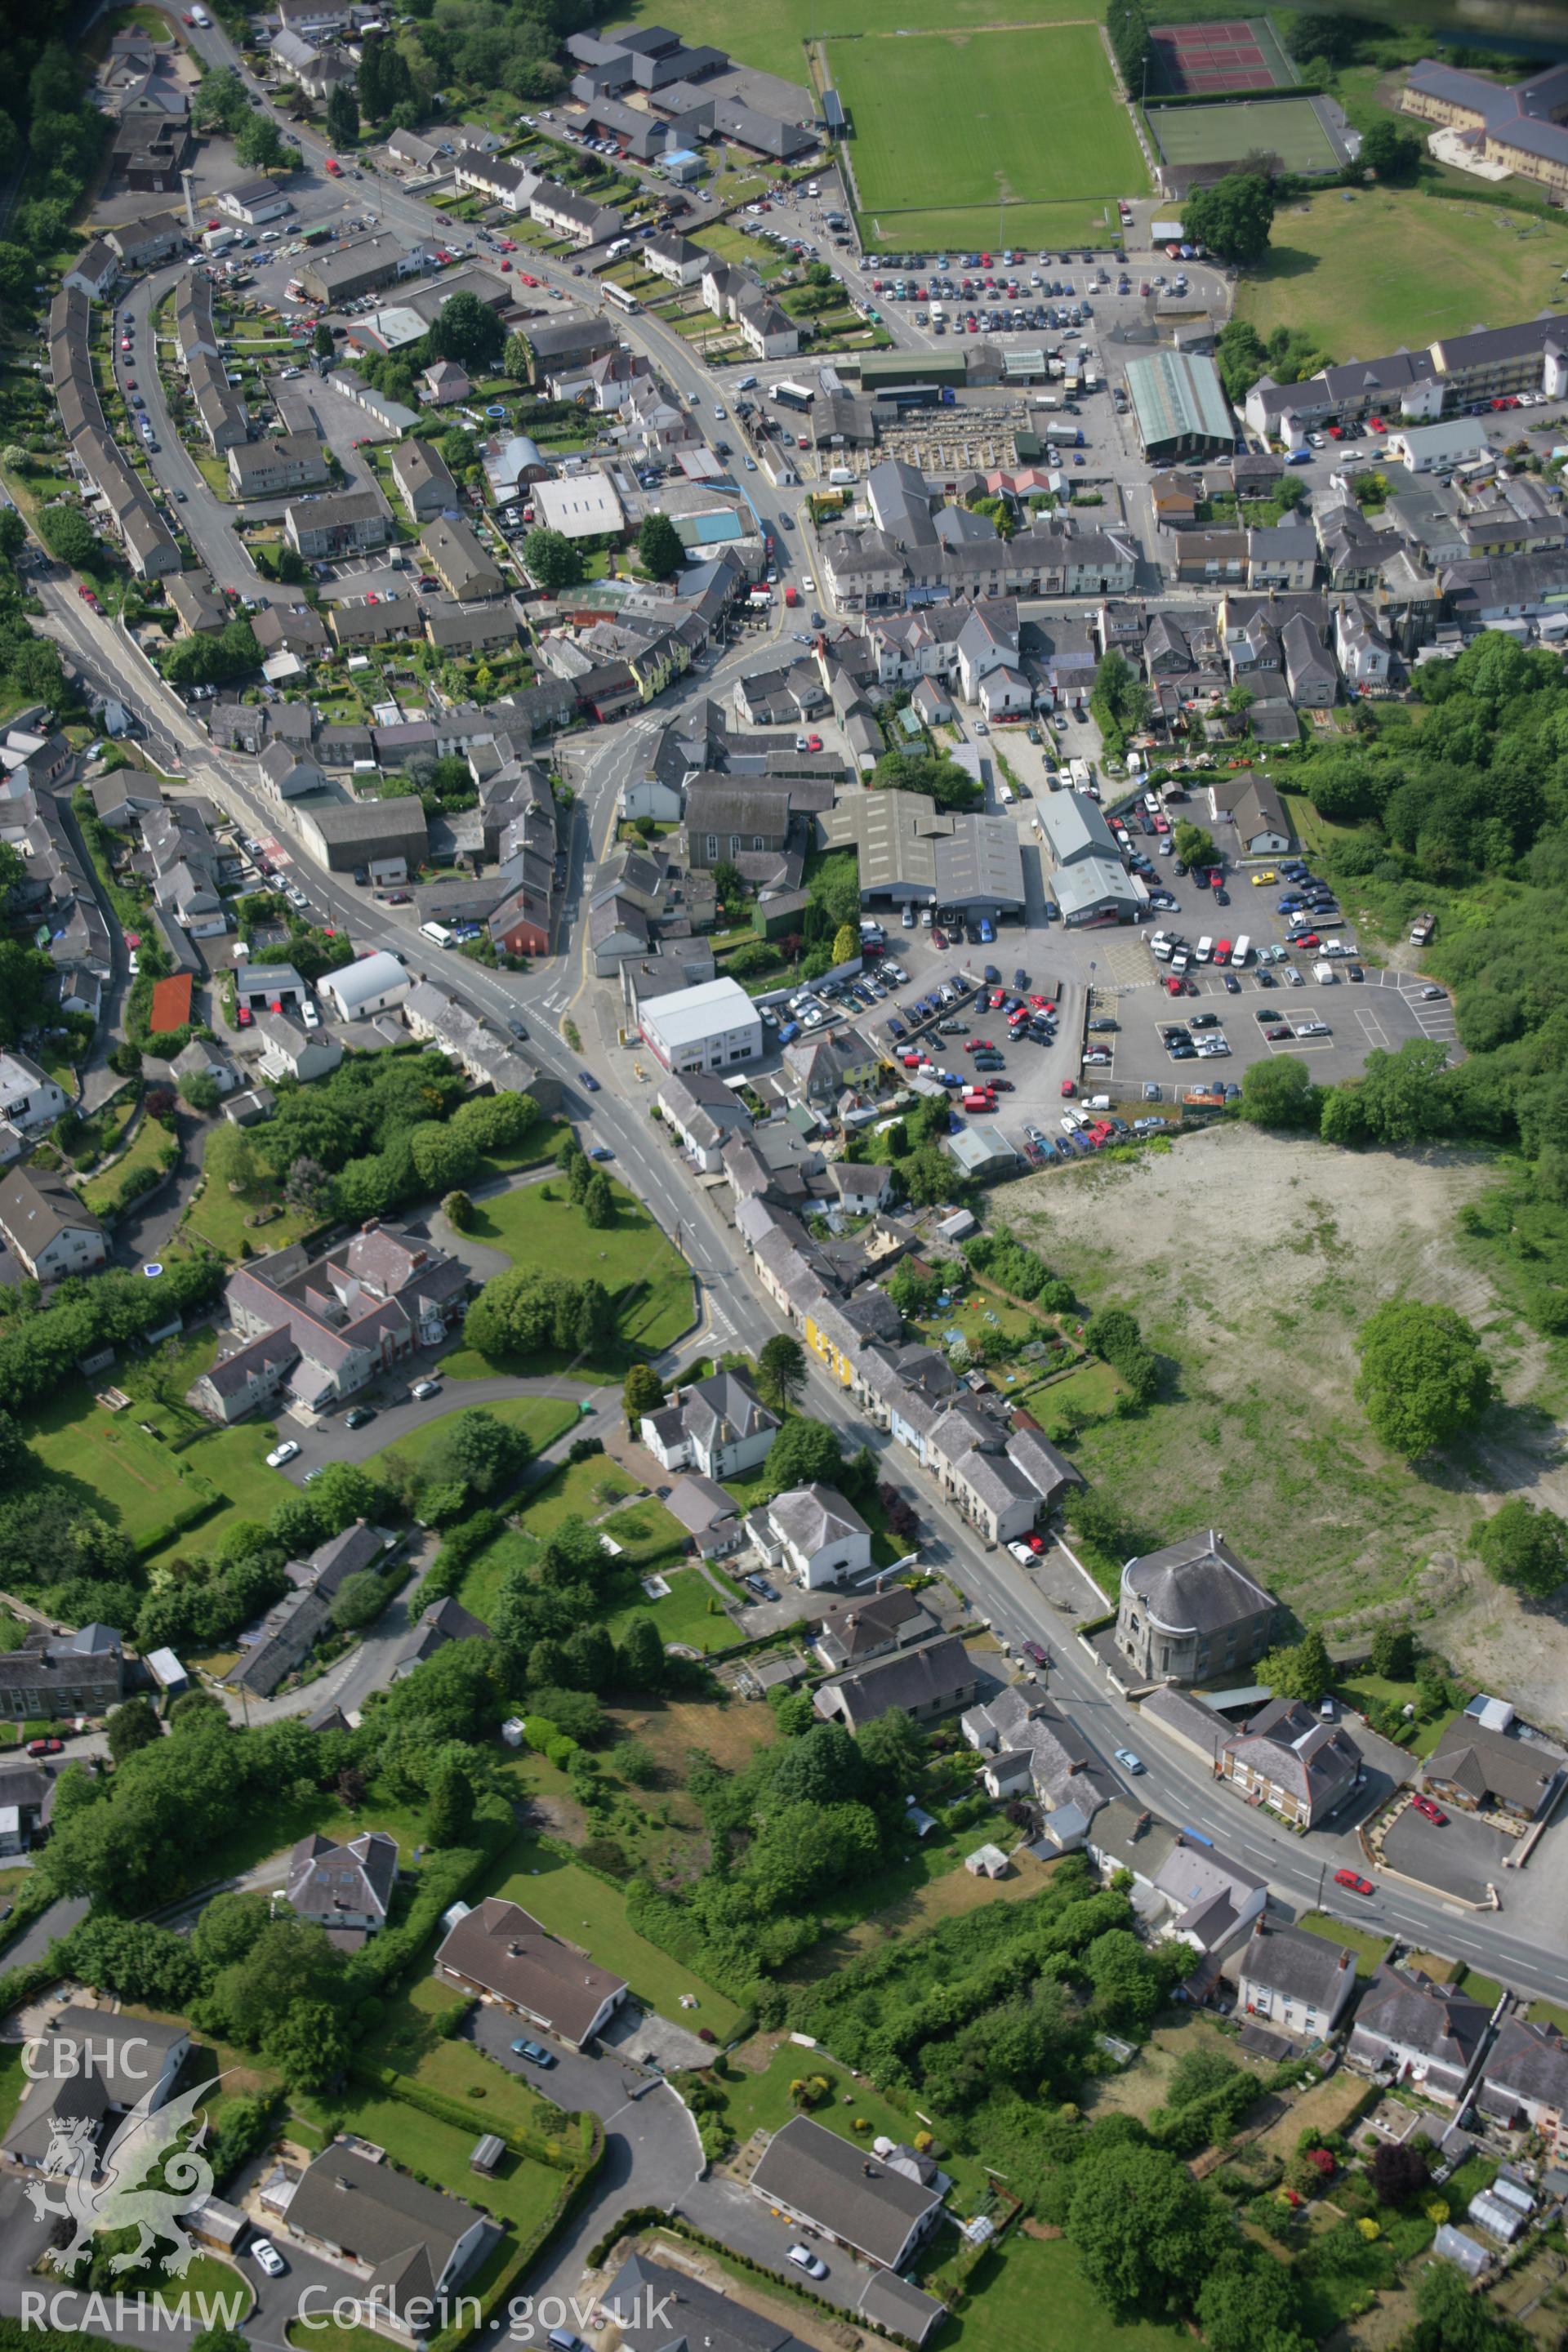 RCAHMW colour oblique aerial photograph of Newcastle Emlyn, viewed from the south-east. Taken on 08 June 2006 by Toby Driver.